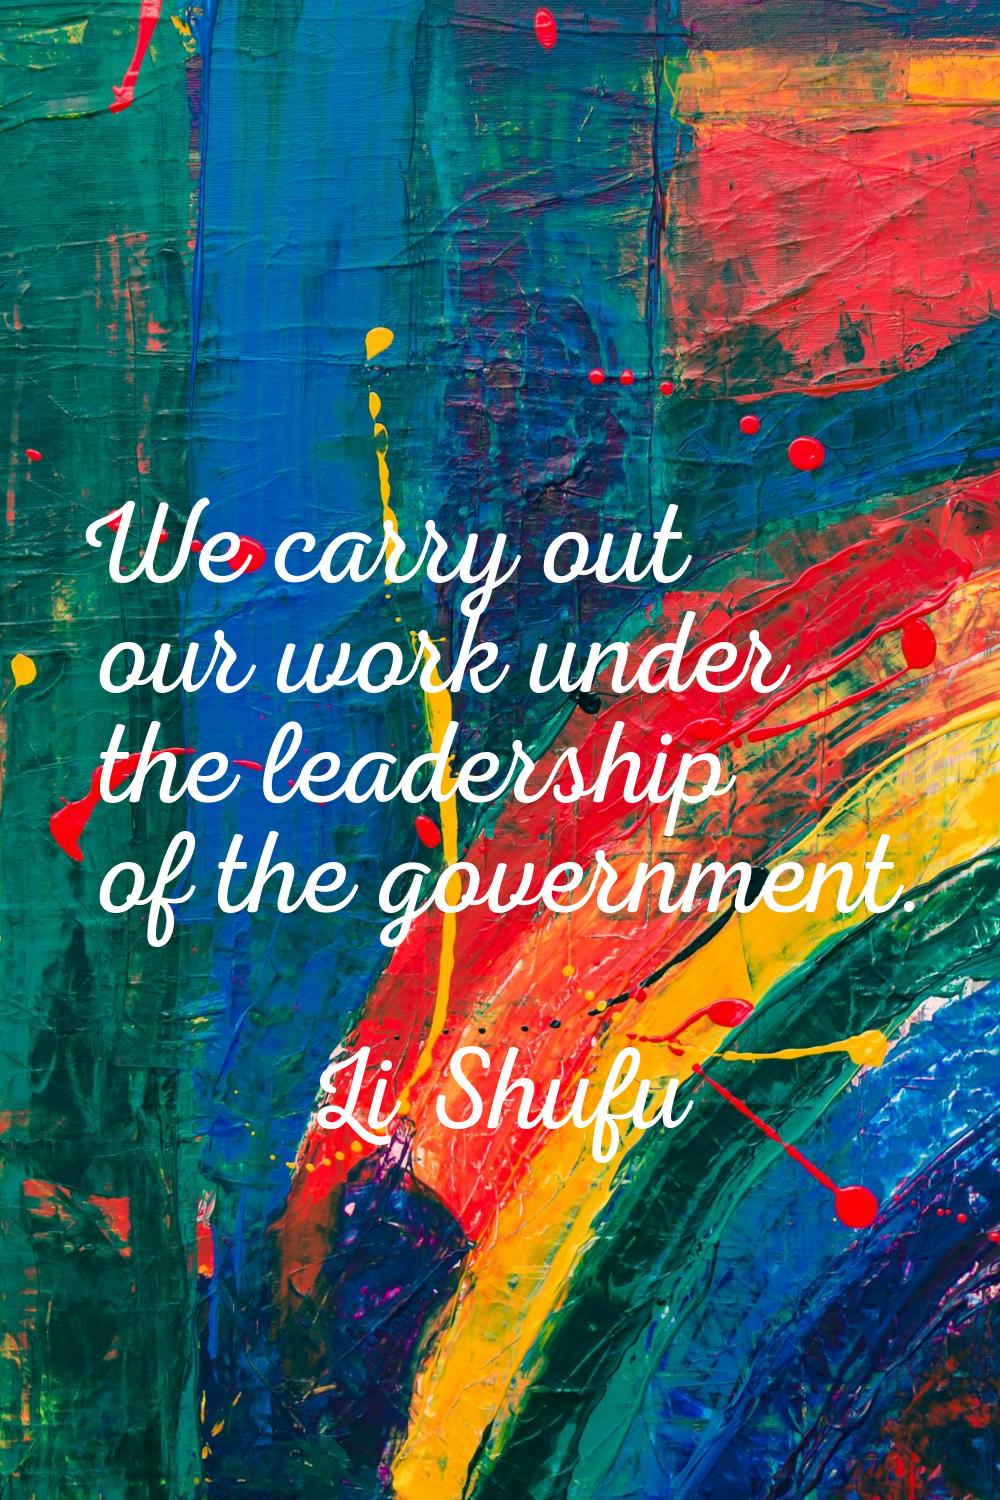 We carry out our work under the leadership of the government.